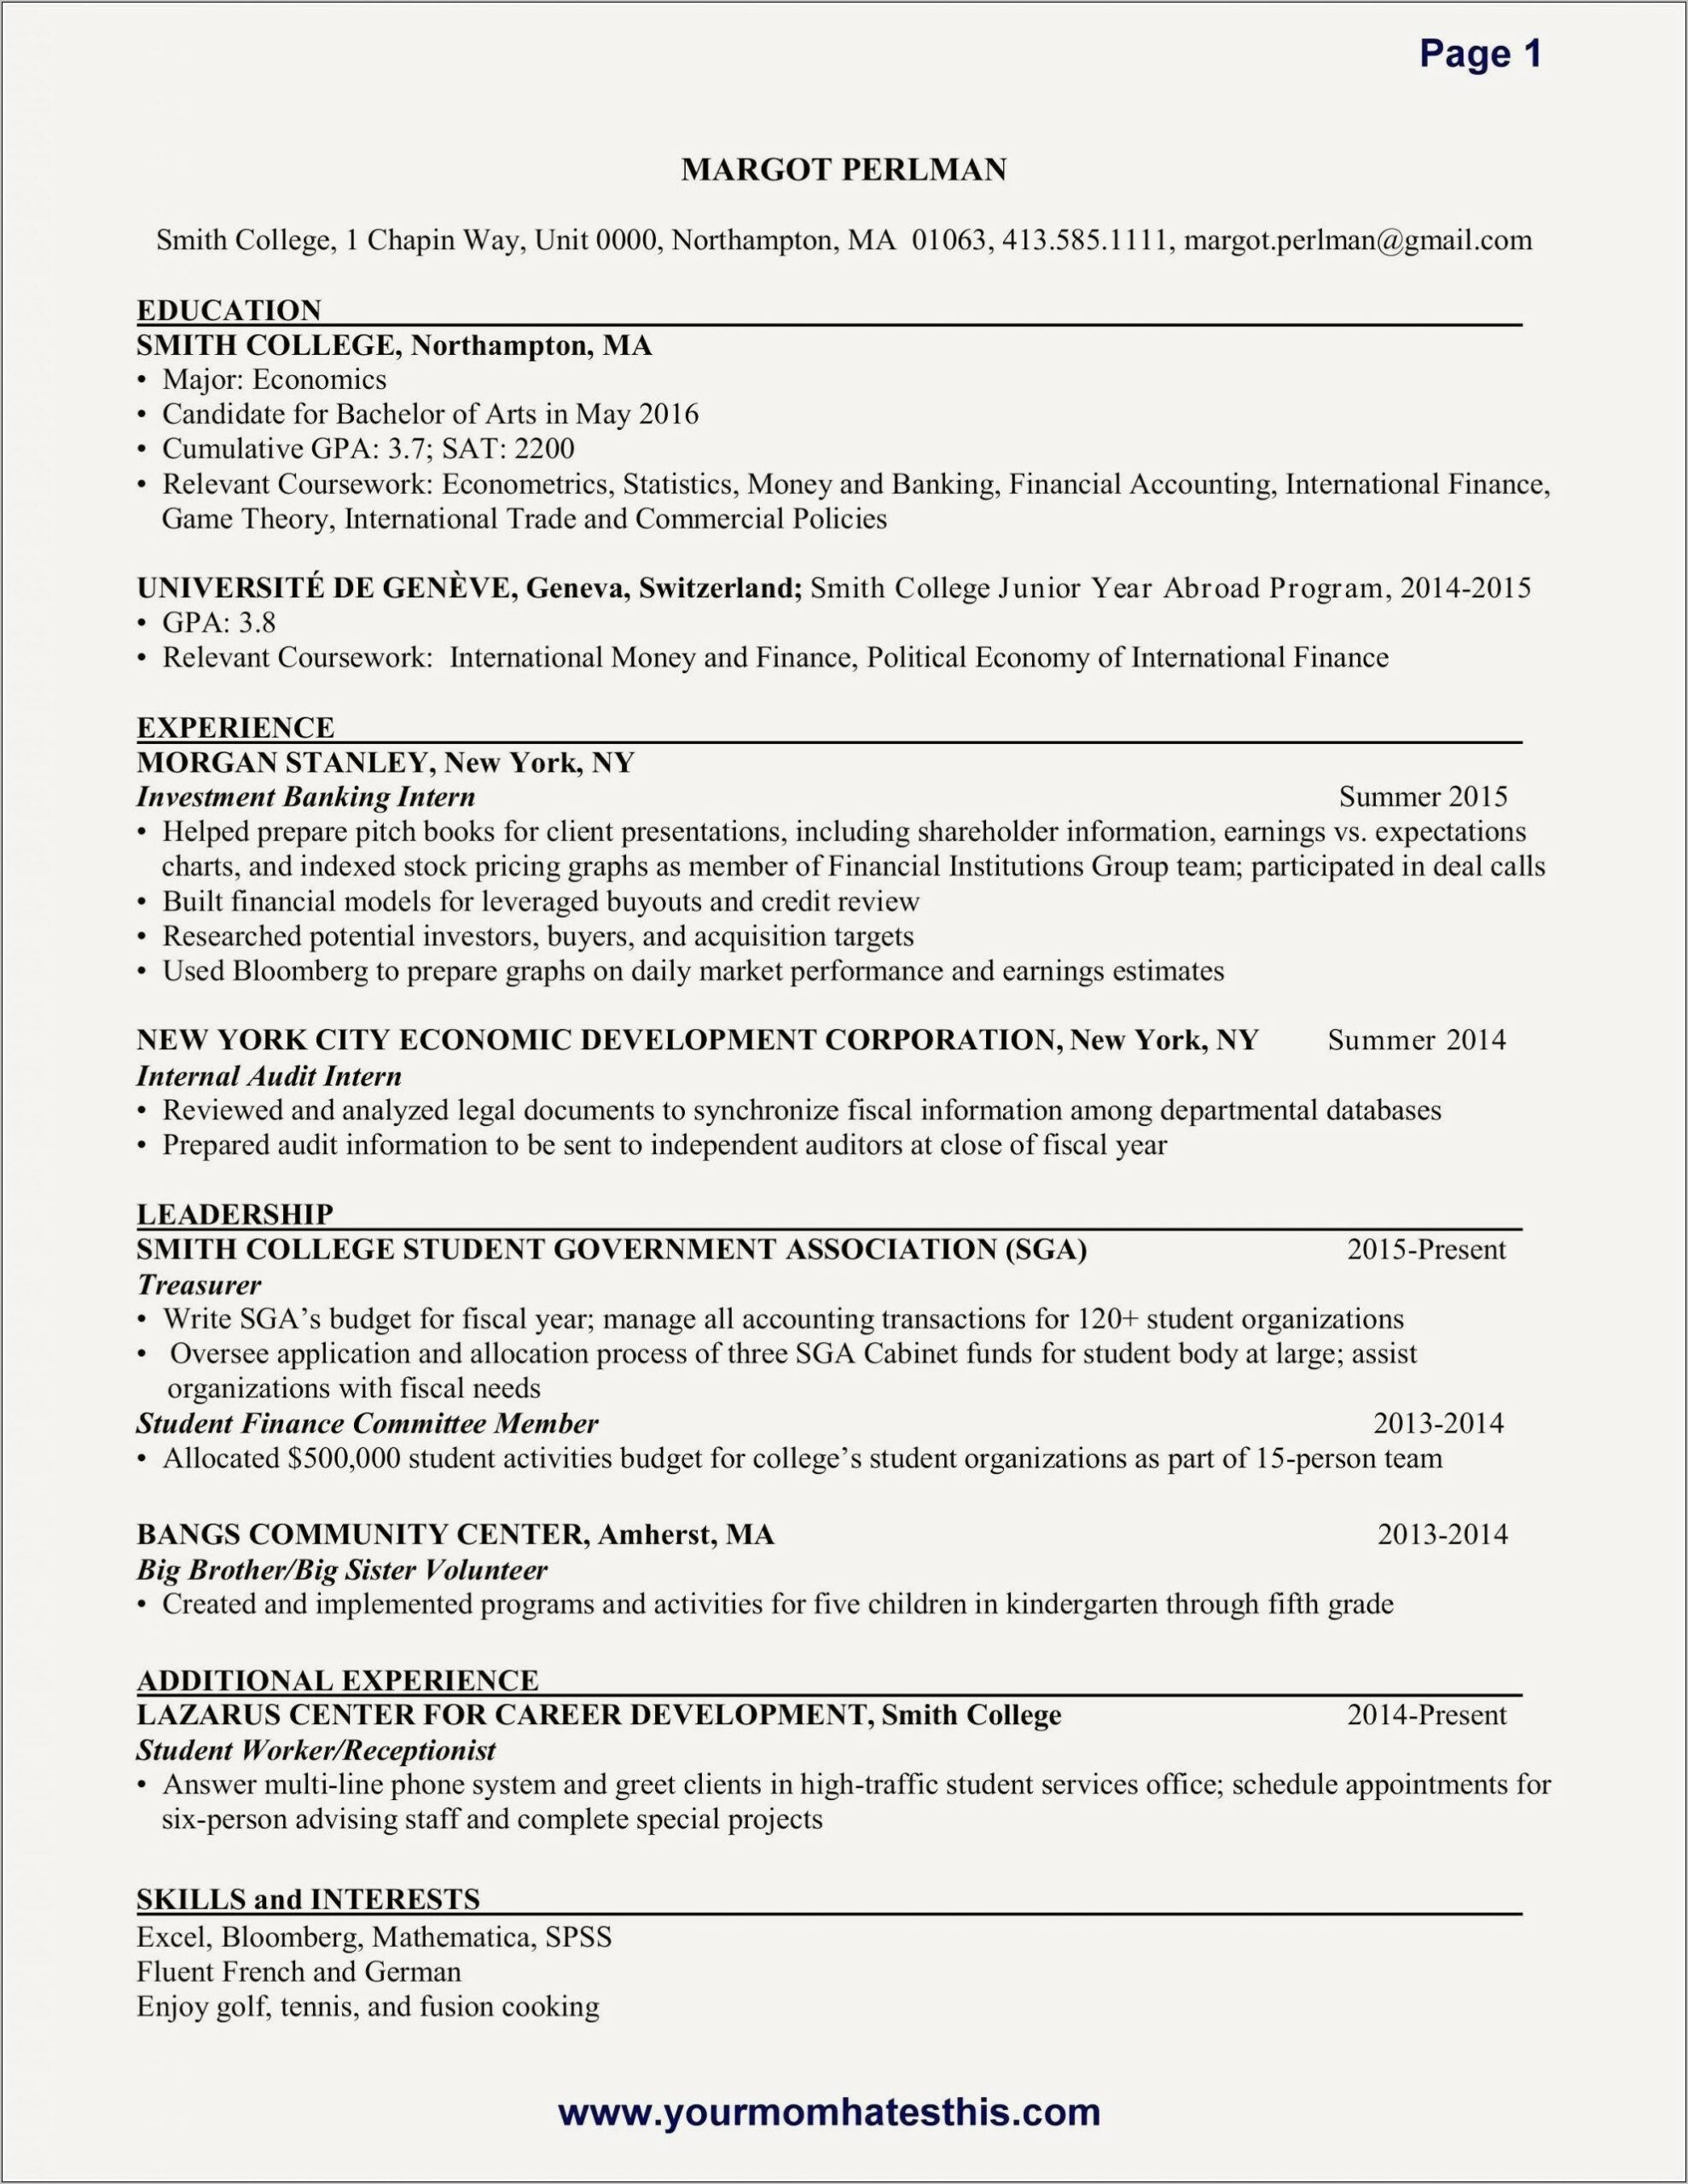 Skills Part Of Resume Includes For Internship